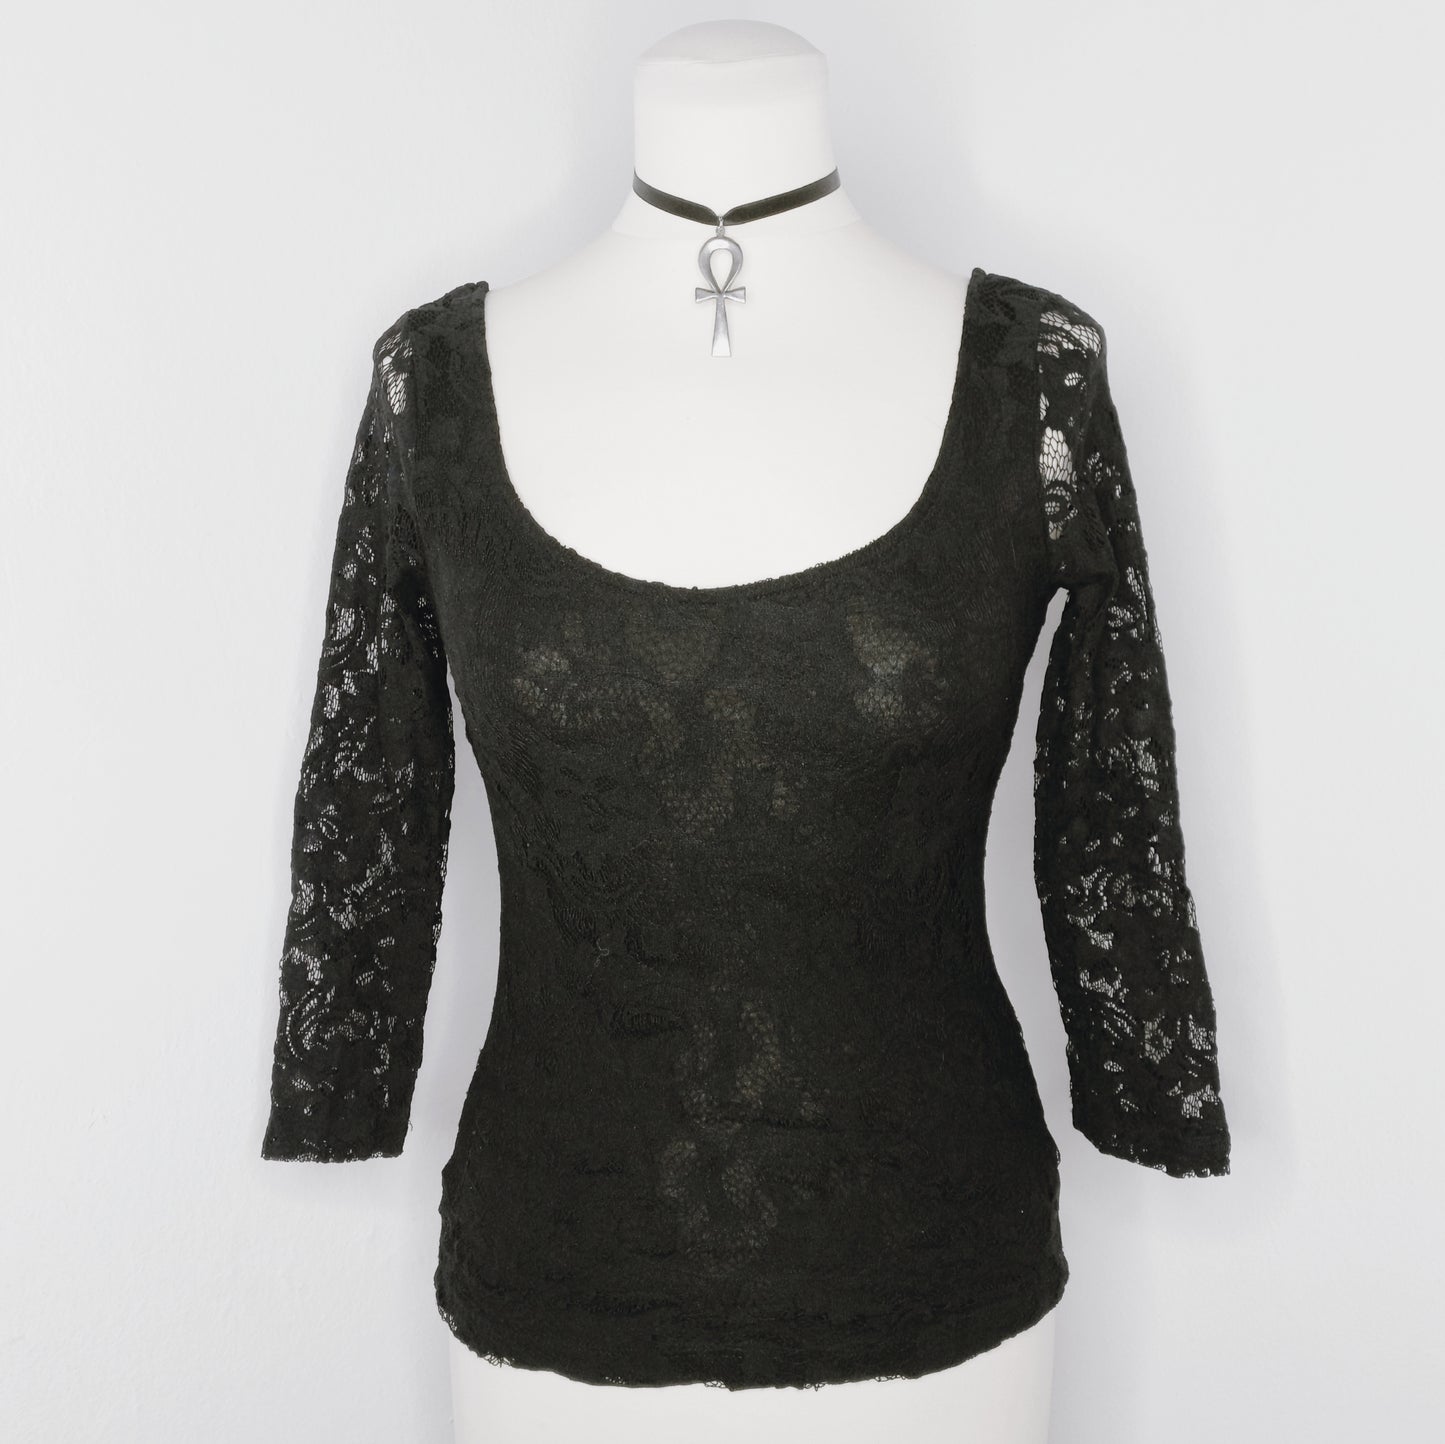 All Lace 3/4 Sleeve Top - S